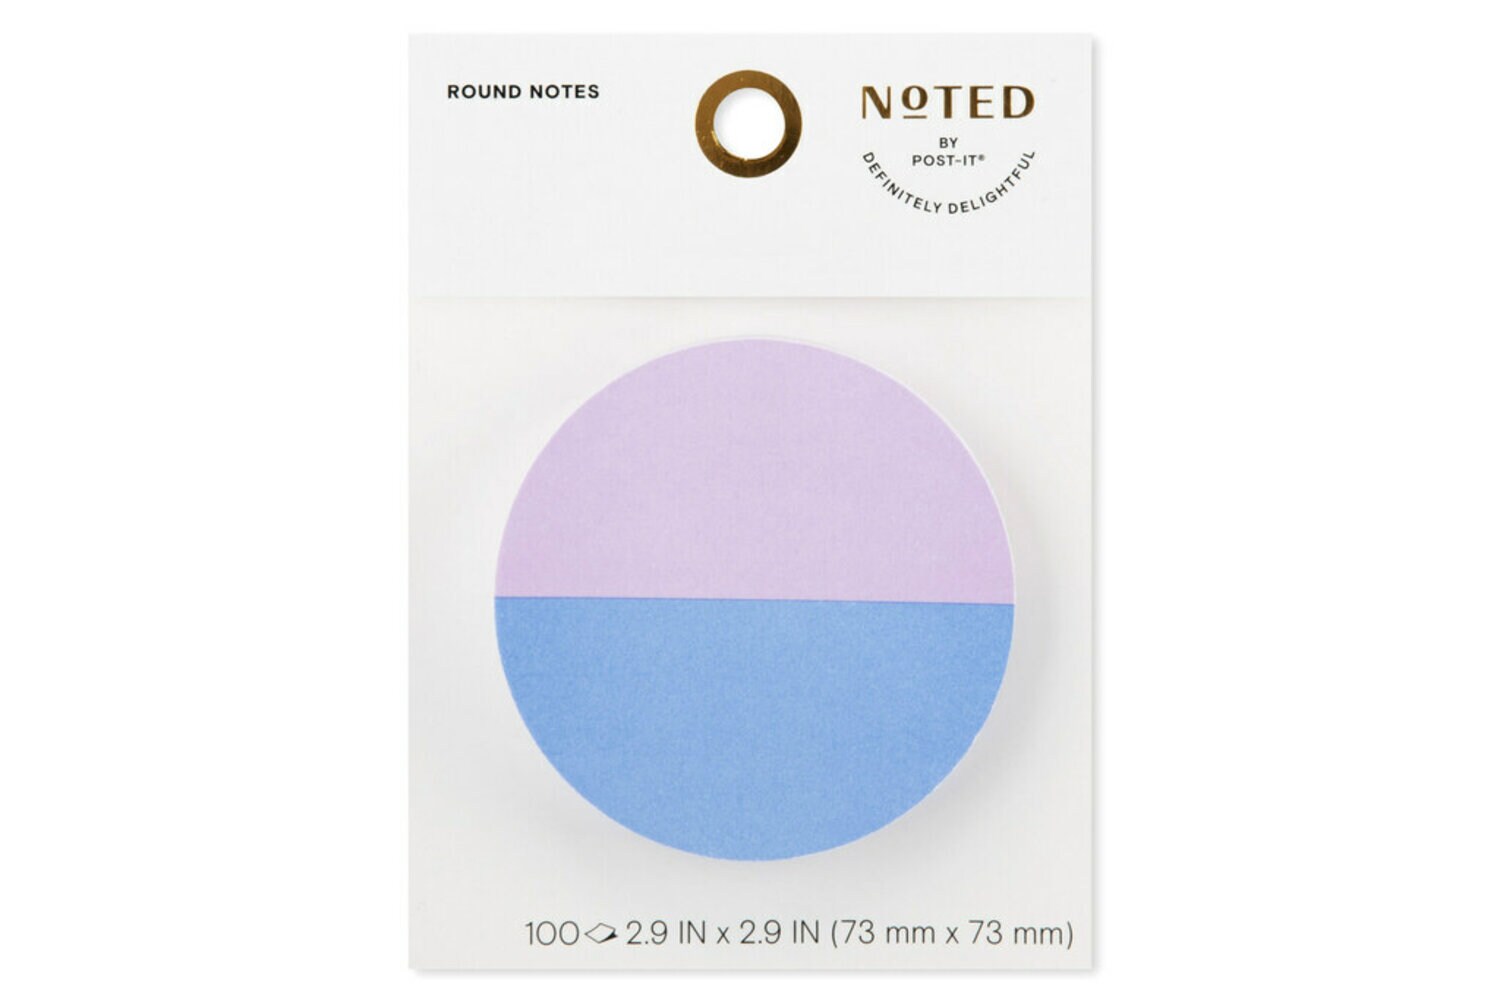 7100256398 - Post-it Printed Notes NTD-3RD-LB, 2.9 in x 2.9 in (73 mm x 73 mm)